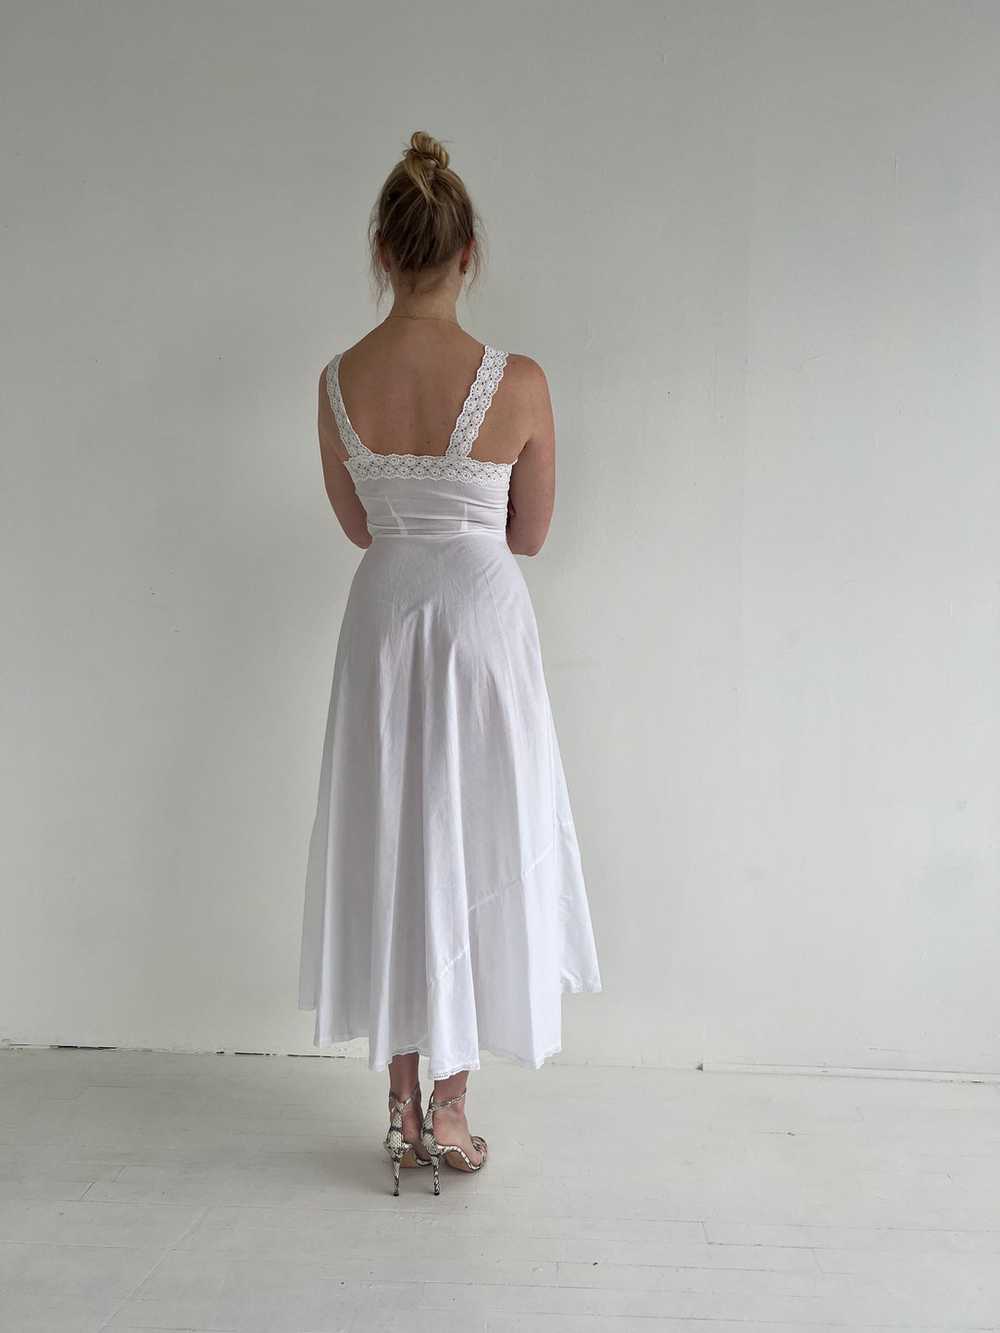 1970's Bridal White Cotton Dress with Lace - image 5